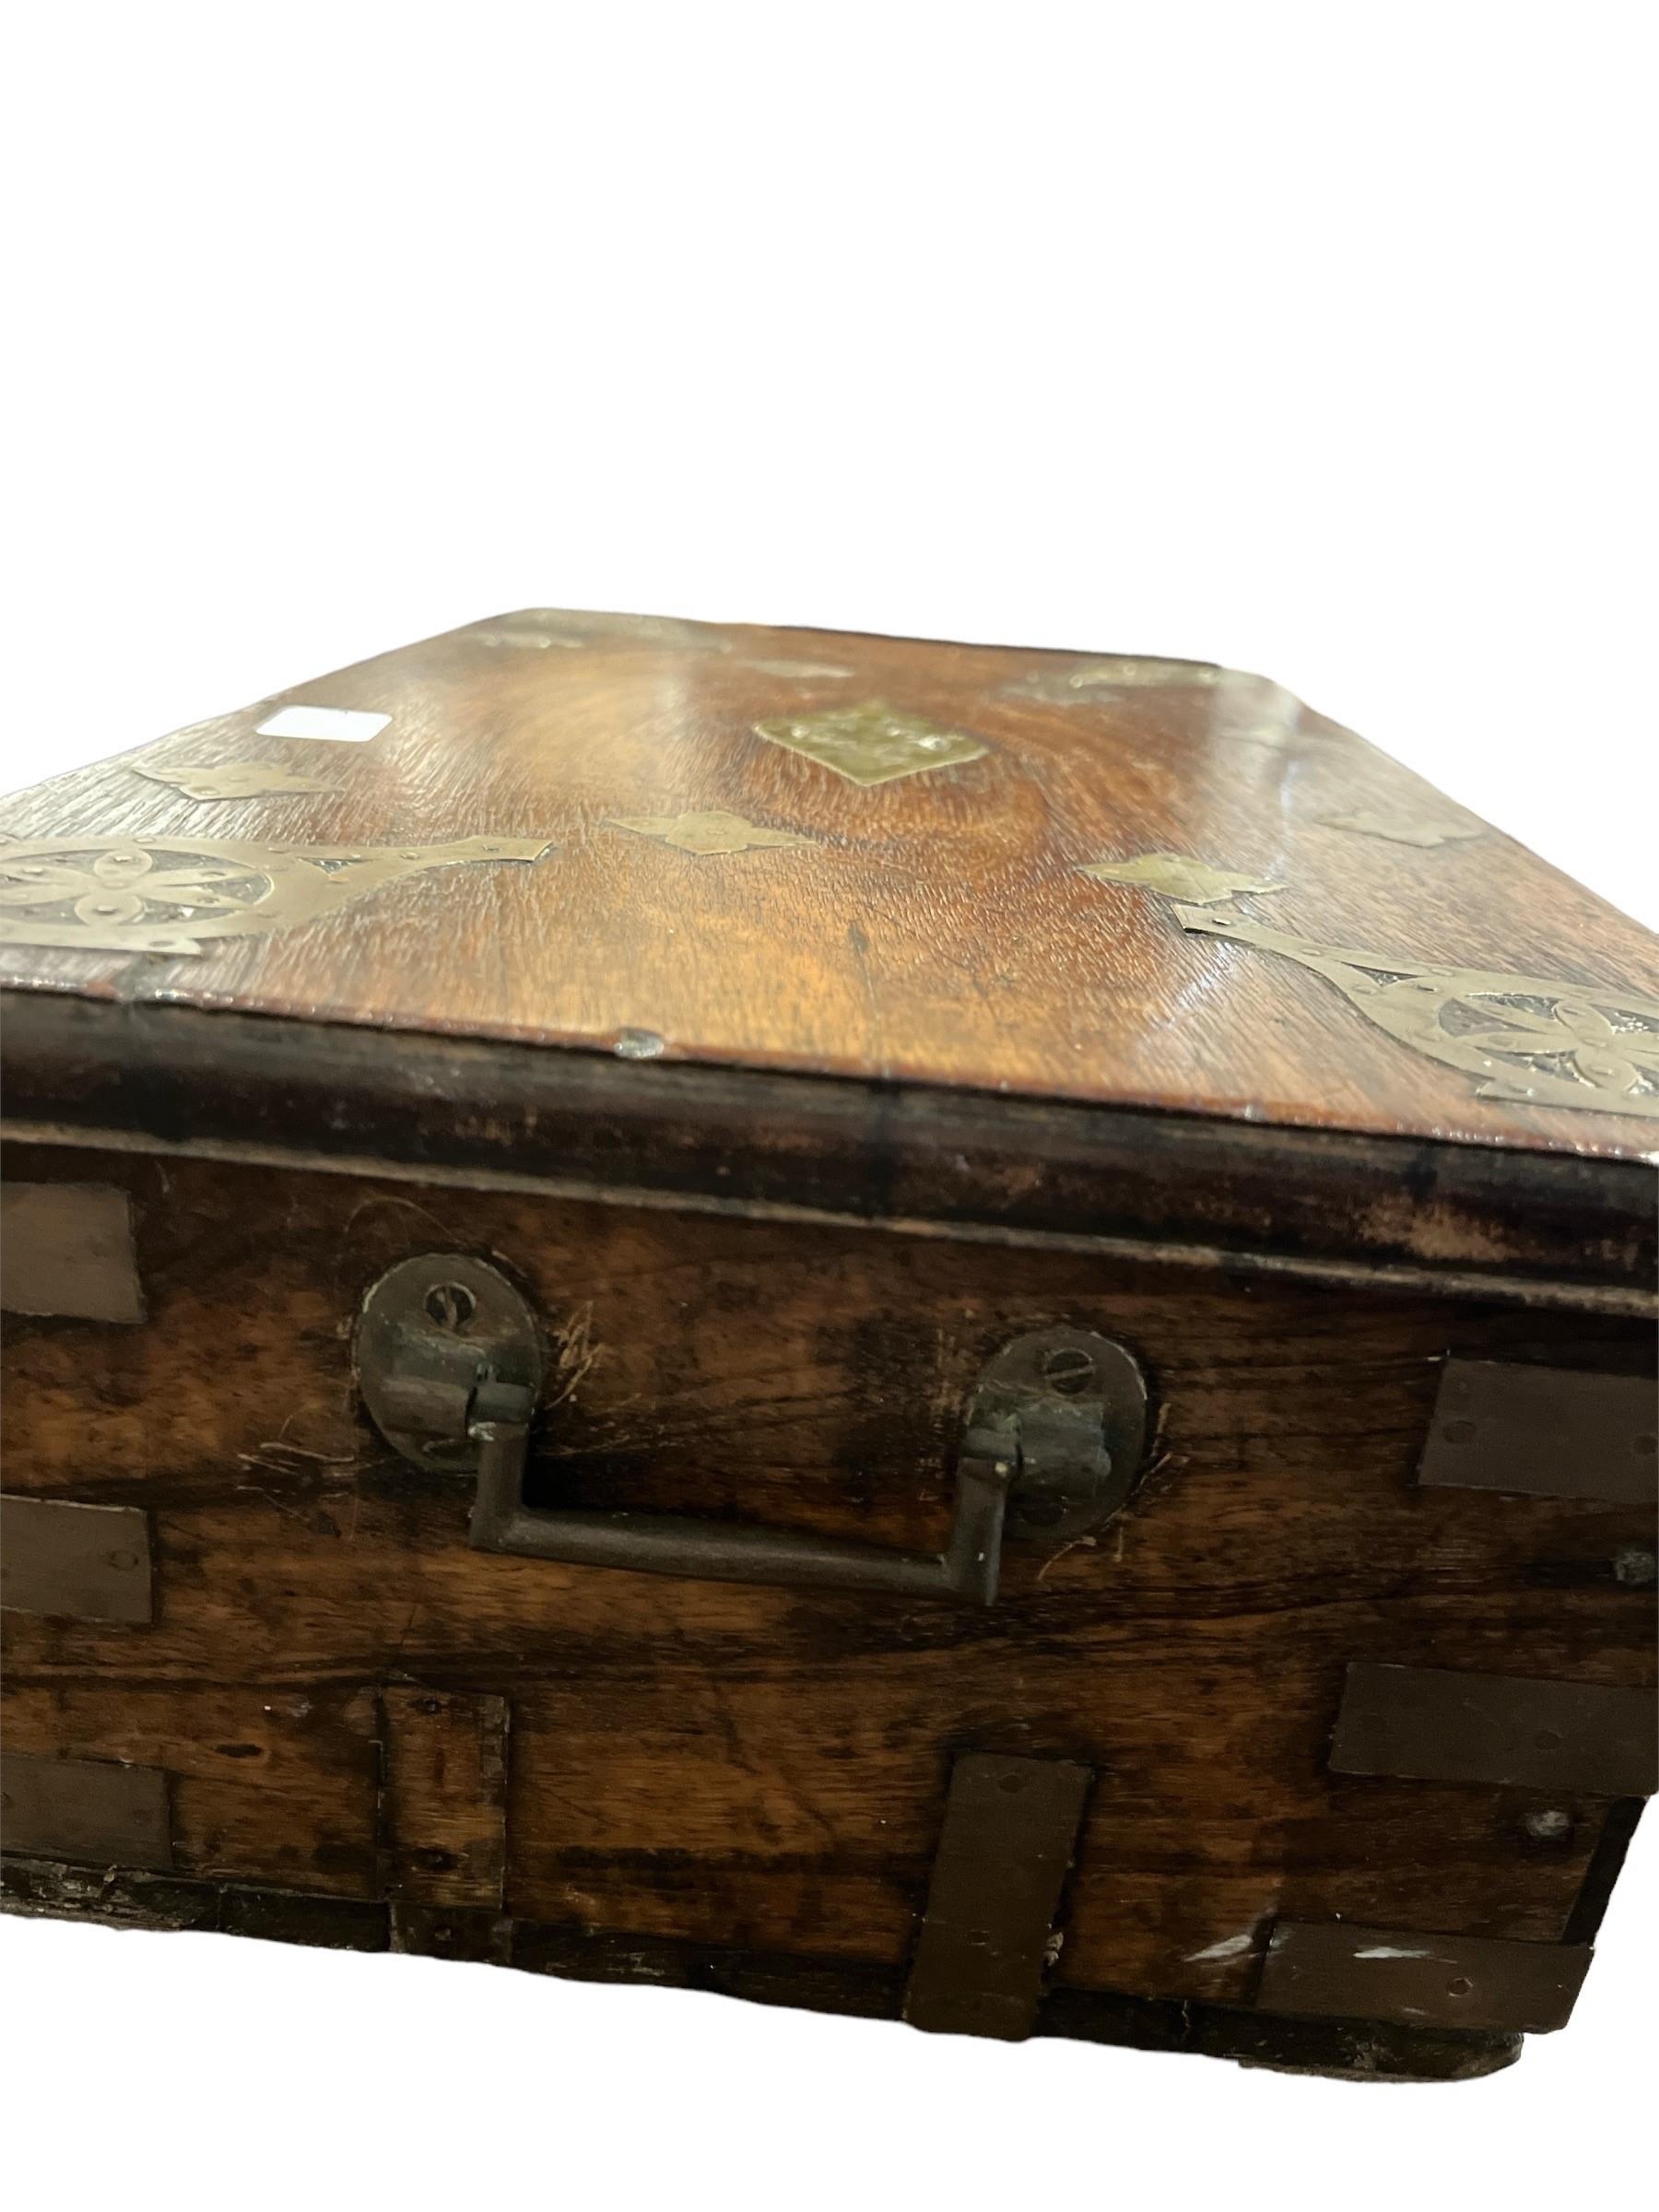 A 19TH CENTURY COLONIAL HARDWOOD AND BRASS BOUND DOCUMENT WRITING BOX With fitted interior. - Image 4 of 4